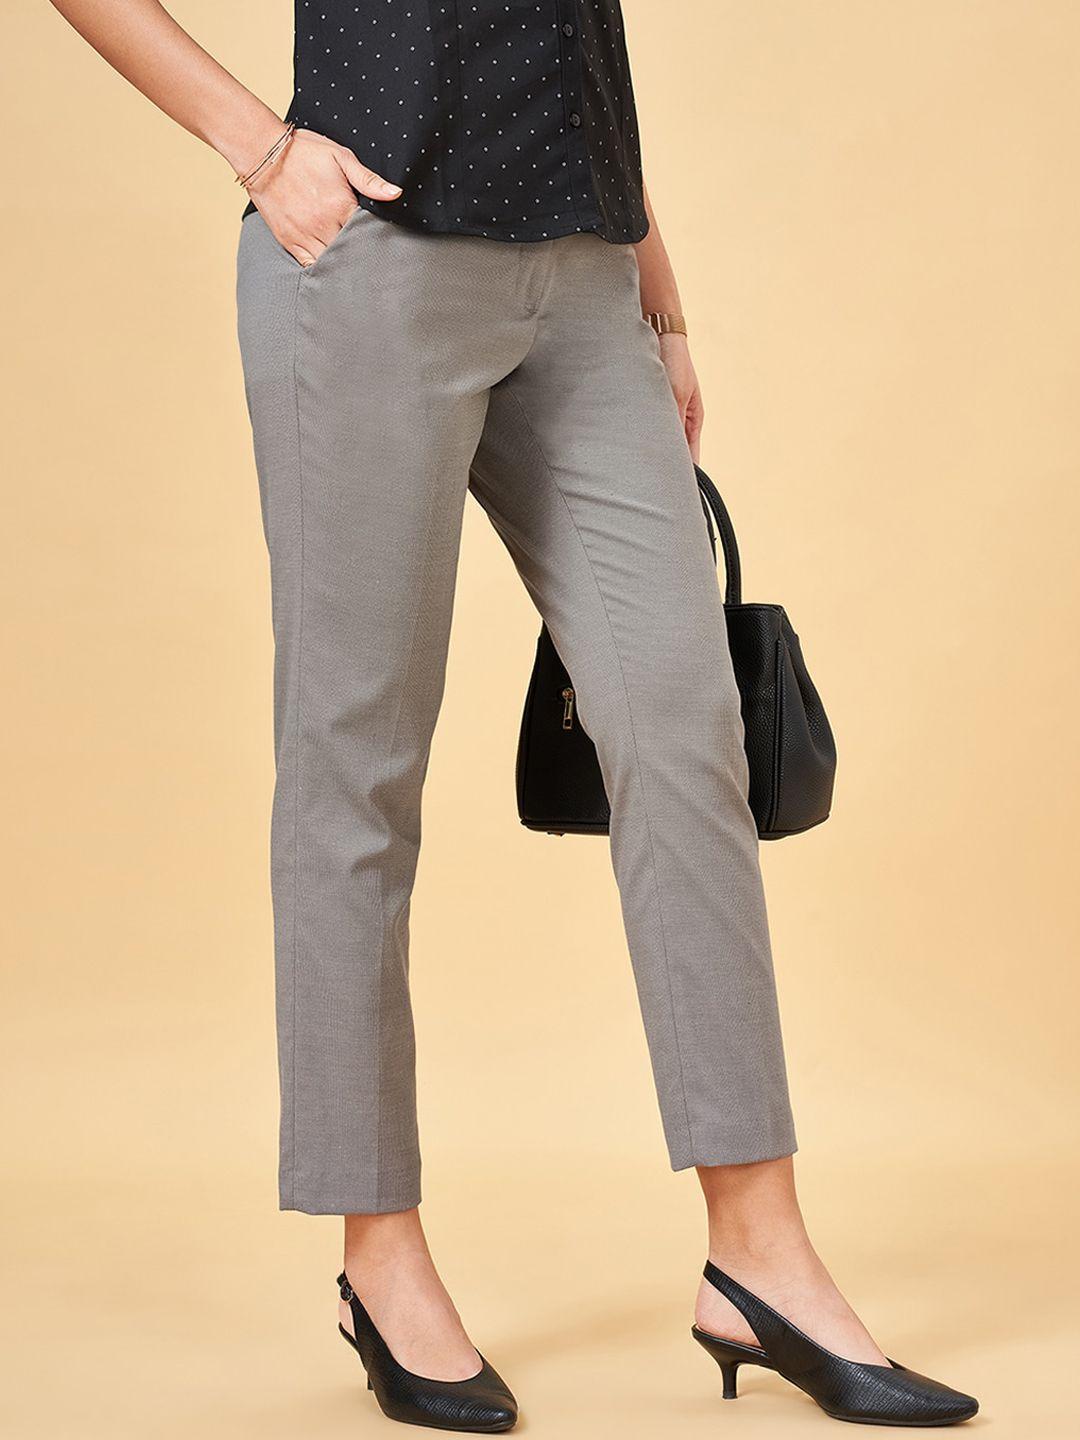 annabelle-by-pantaloons-women-slim-fit-trousers